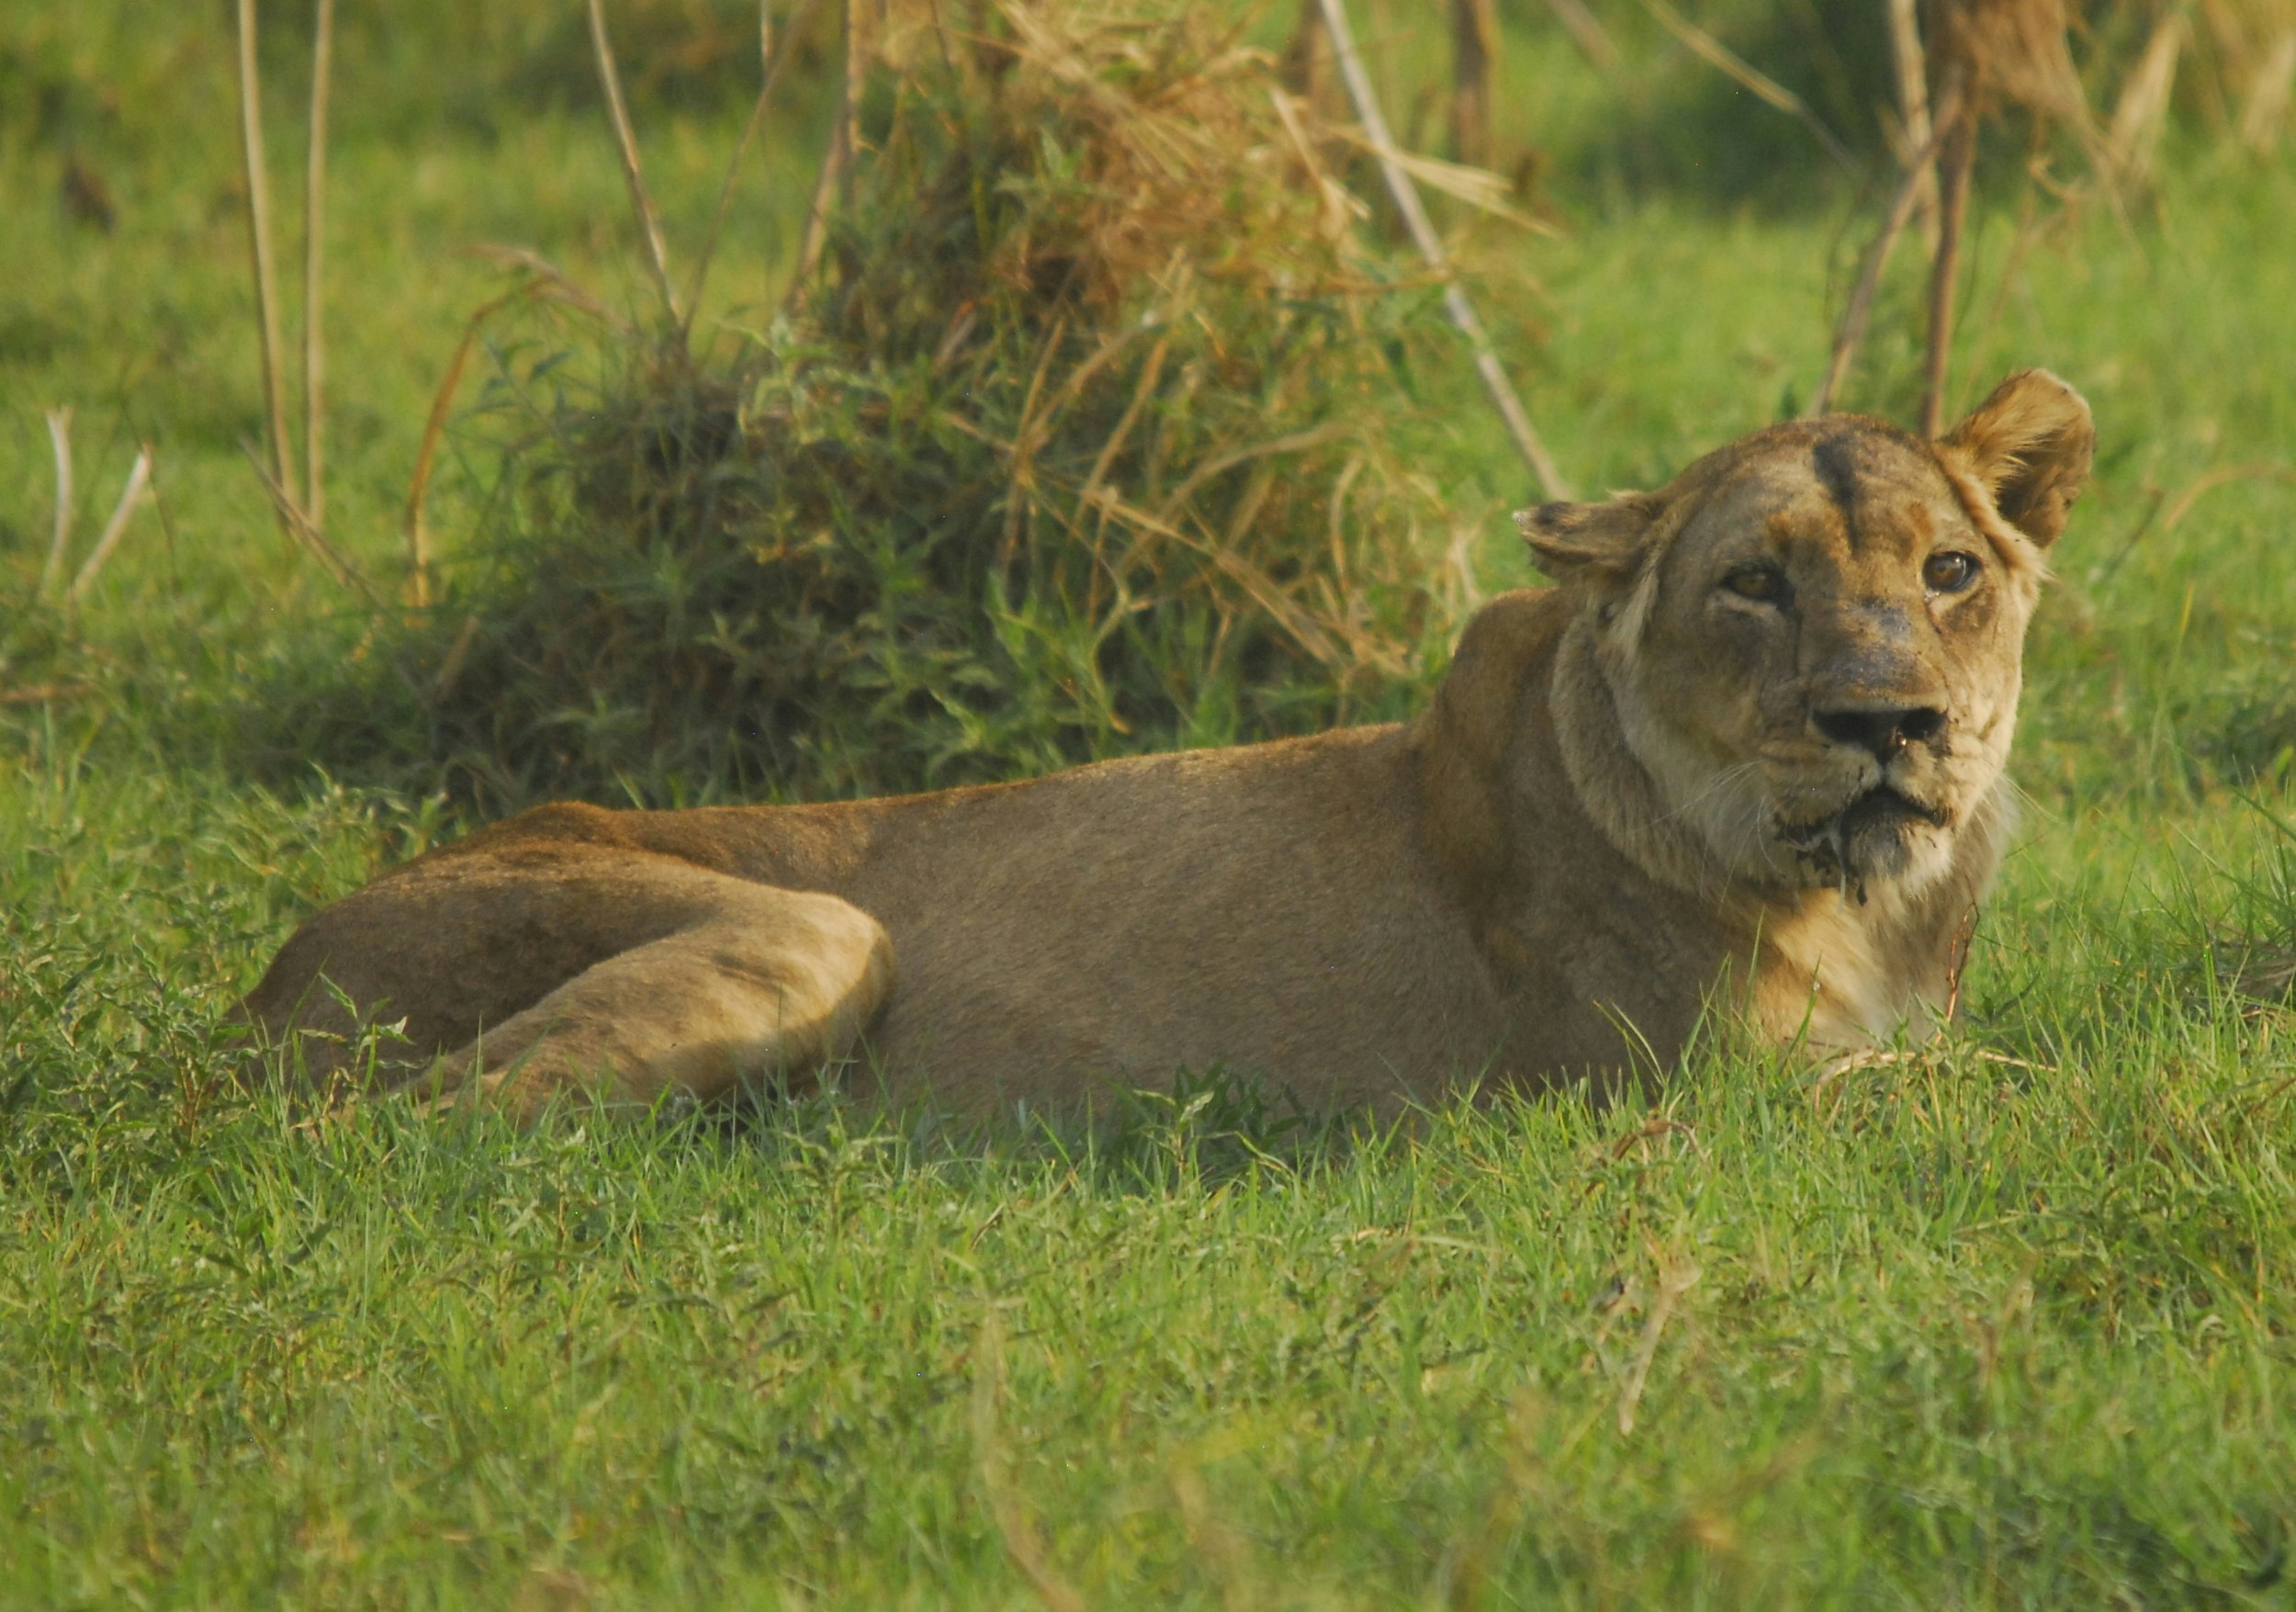 A large female lion lays in long, green grass.